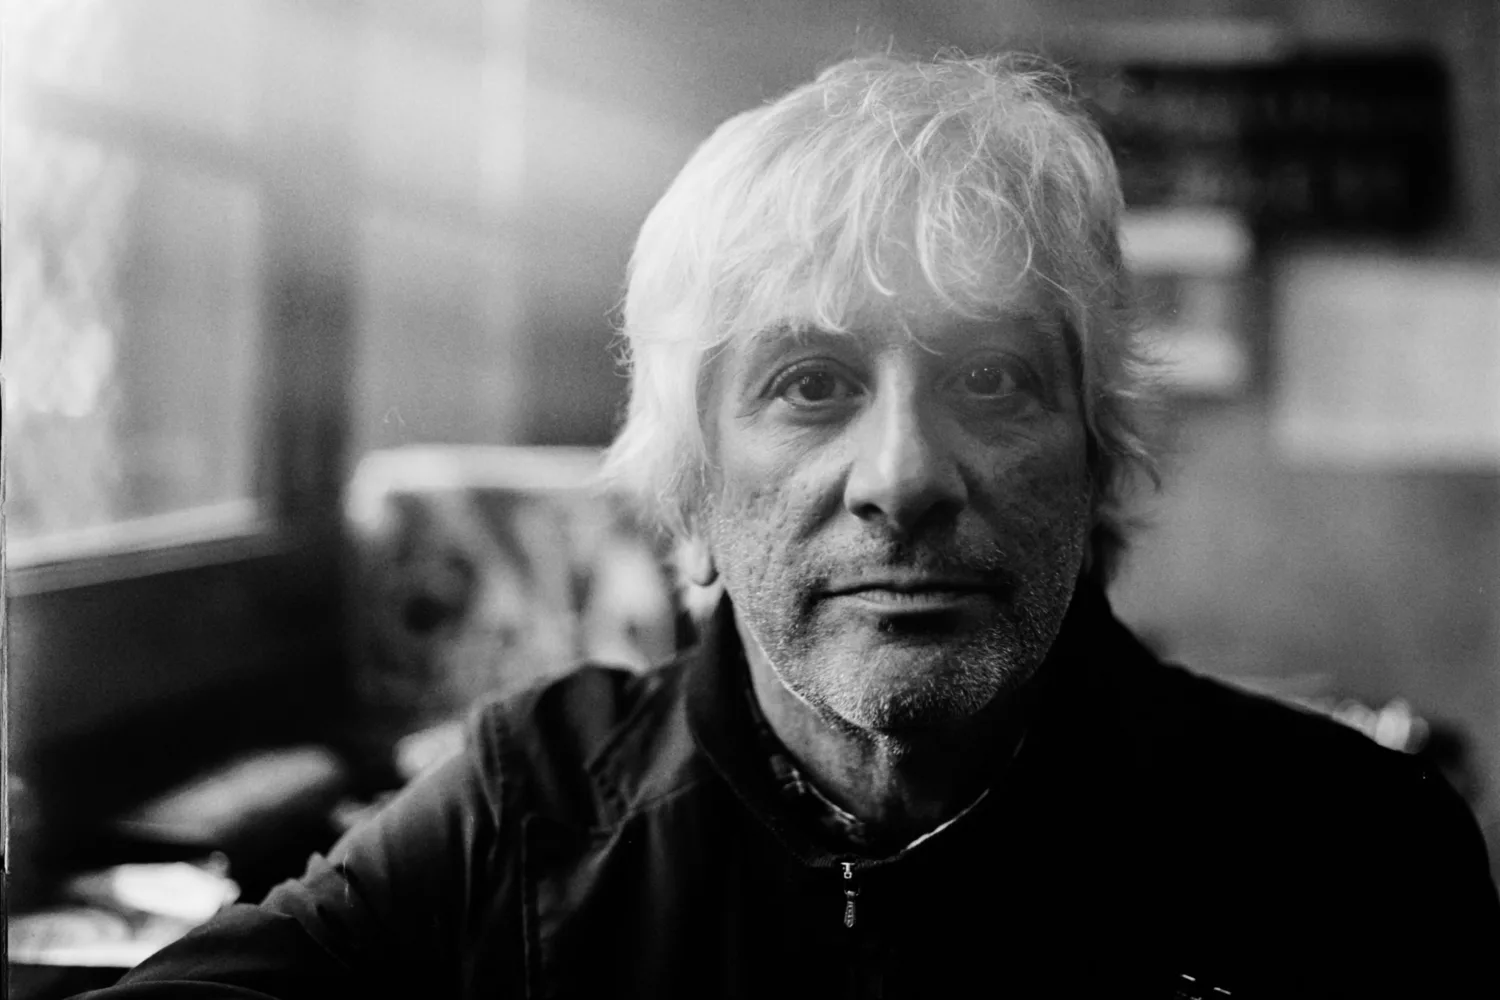 Lee Ranaldo gets psychedelic in the video for ‘Uncle Skeleton’